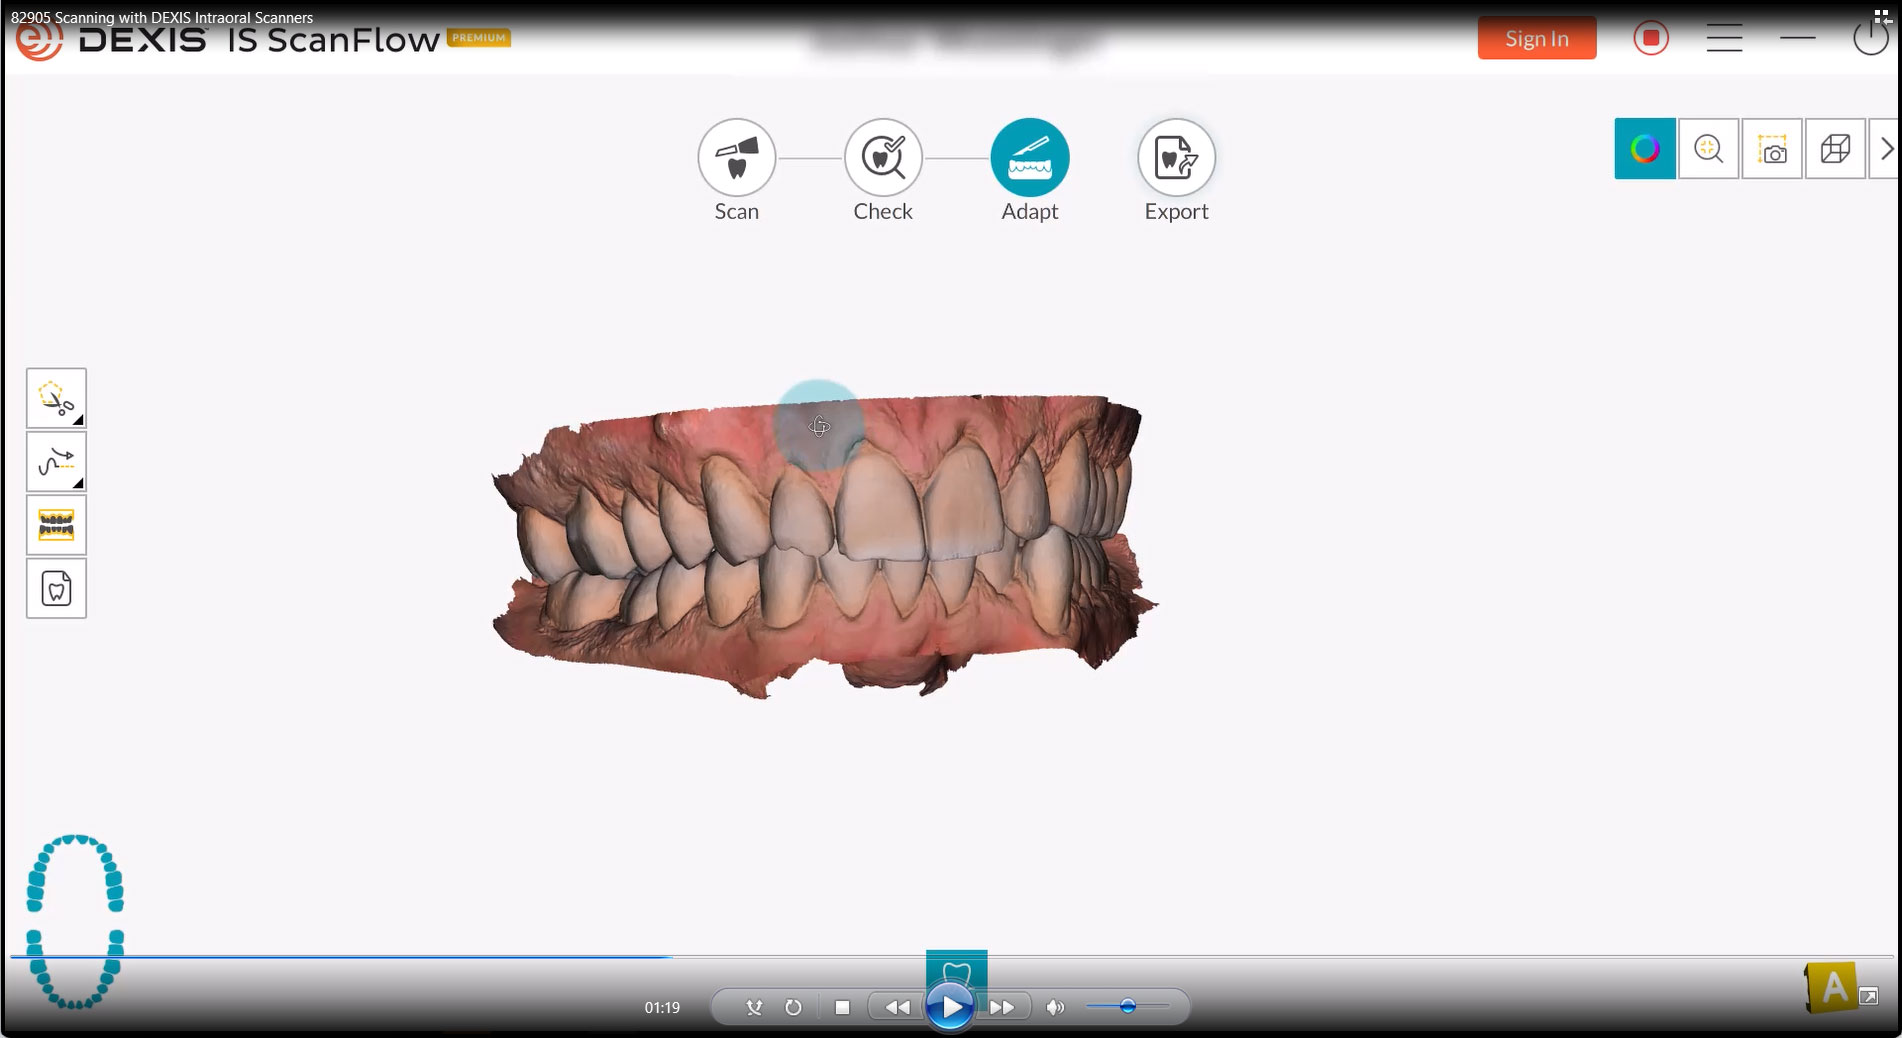 Scanning with DEXIS Intraoral Scanners